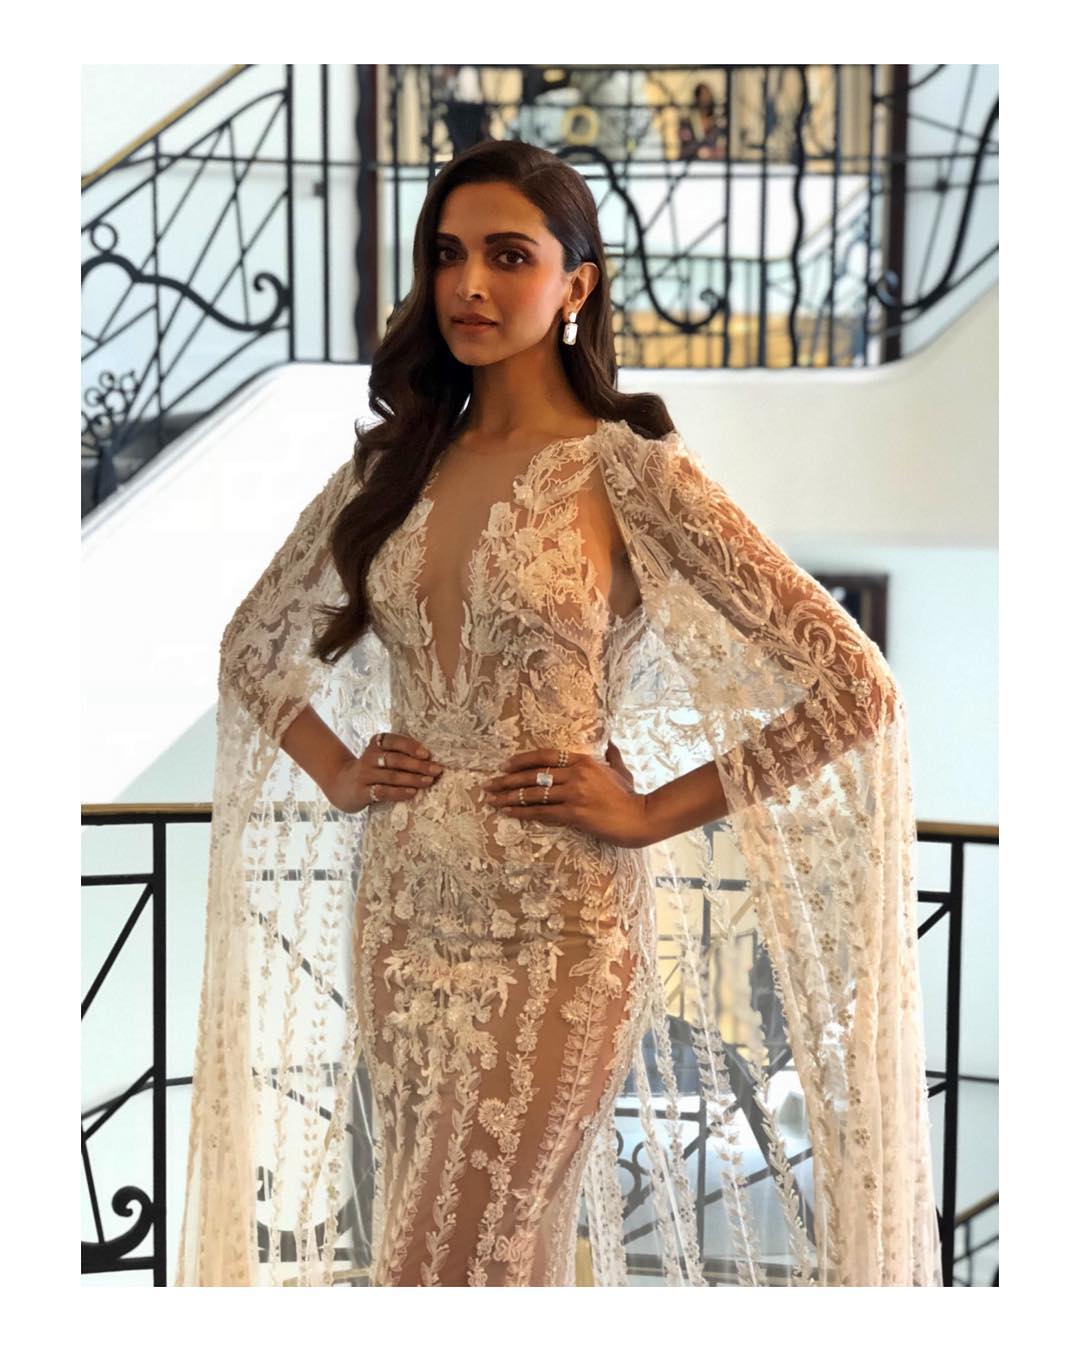 5 Times Deepika Padukone made heads turn in gowns | The Times of India